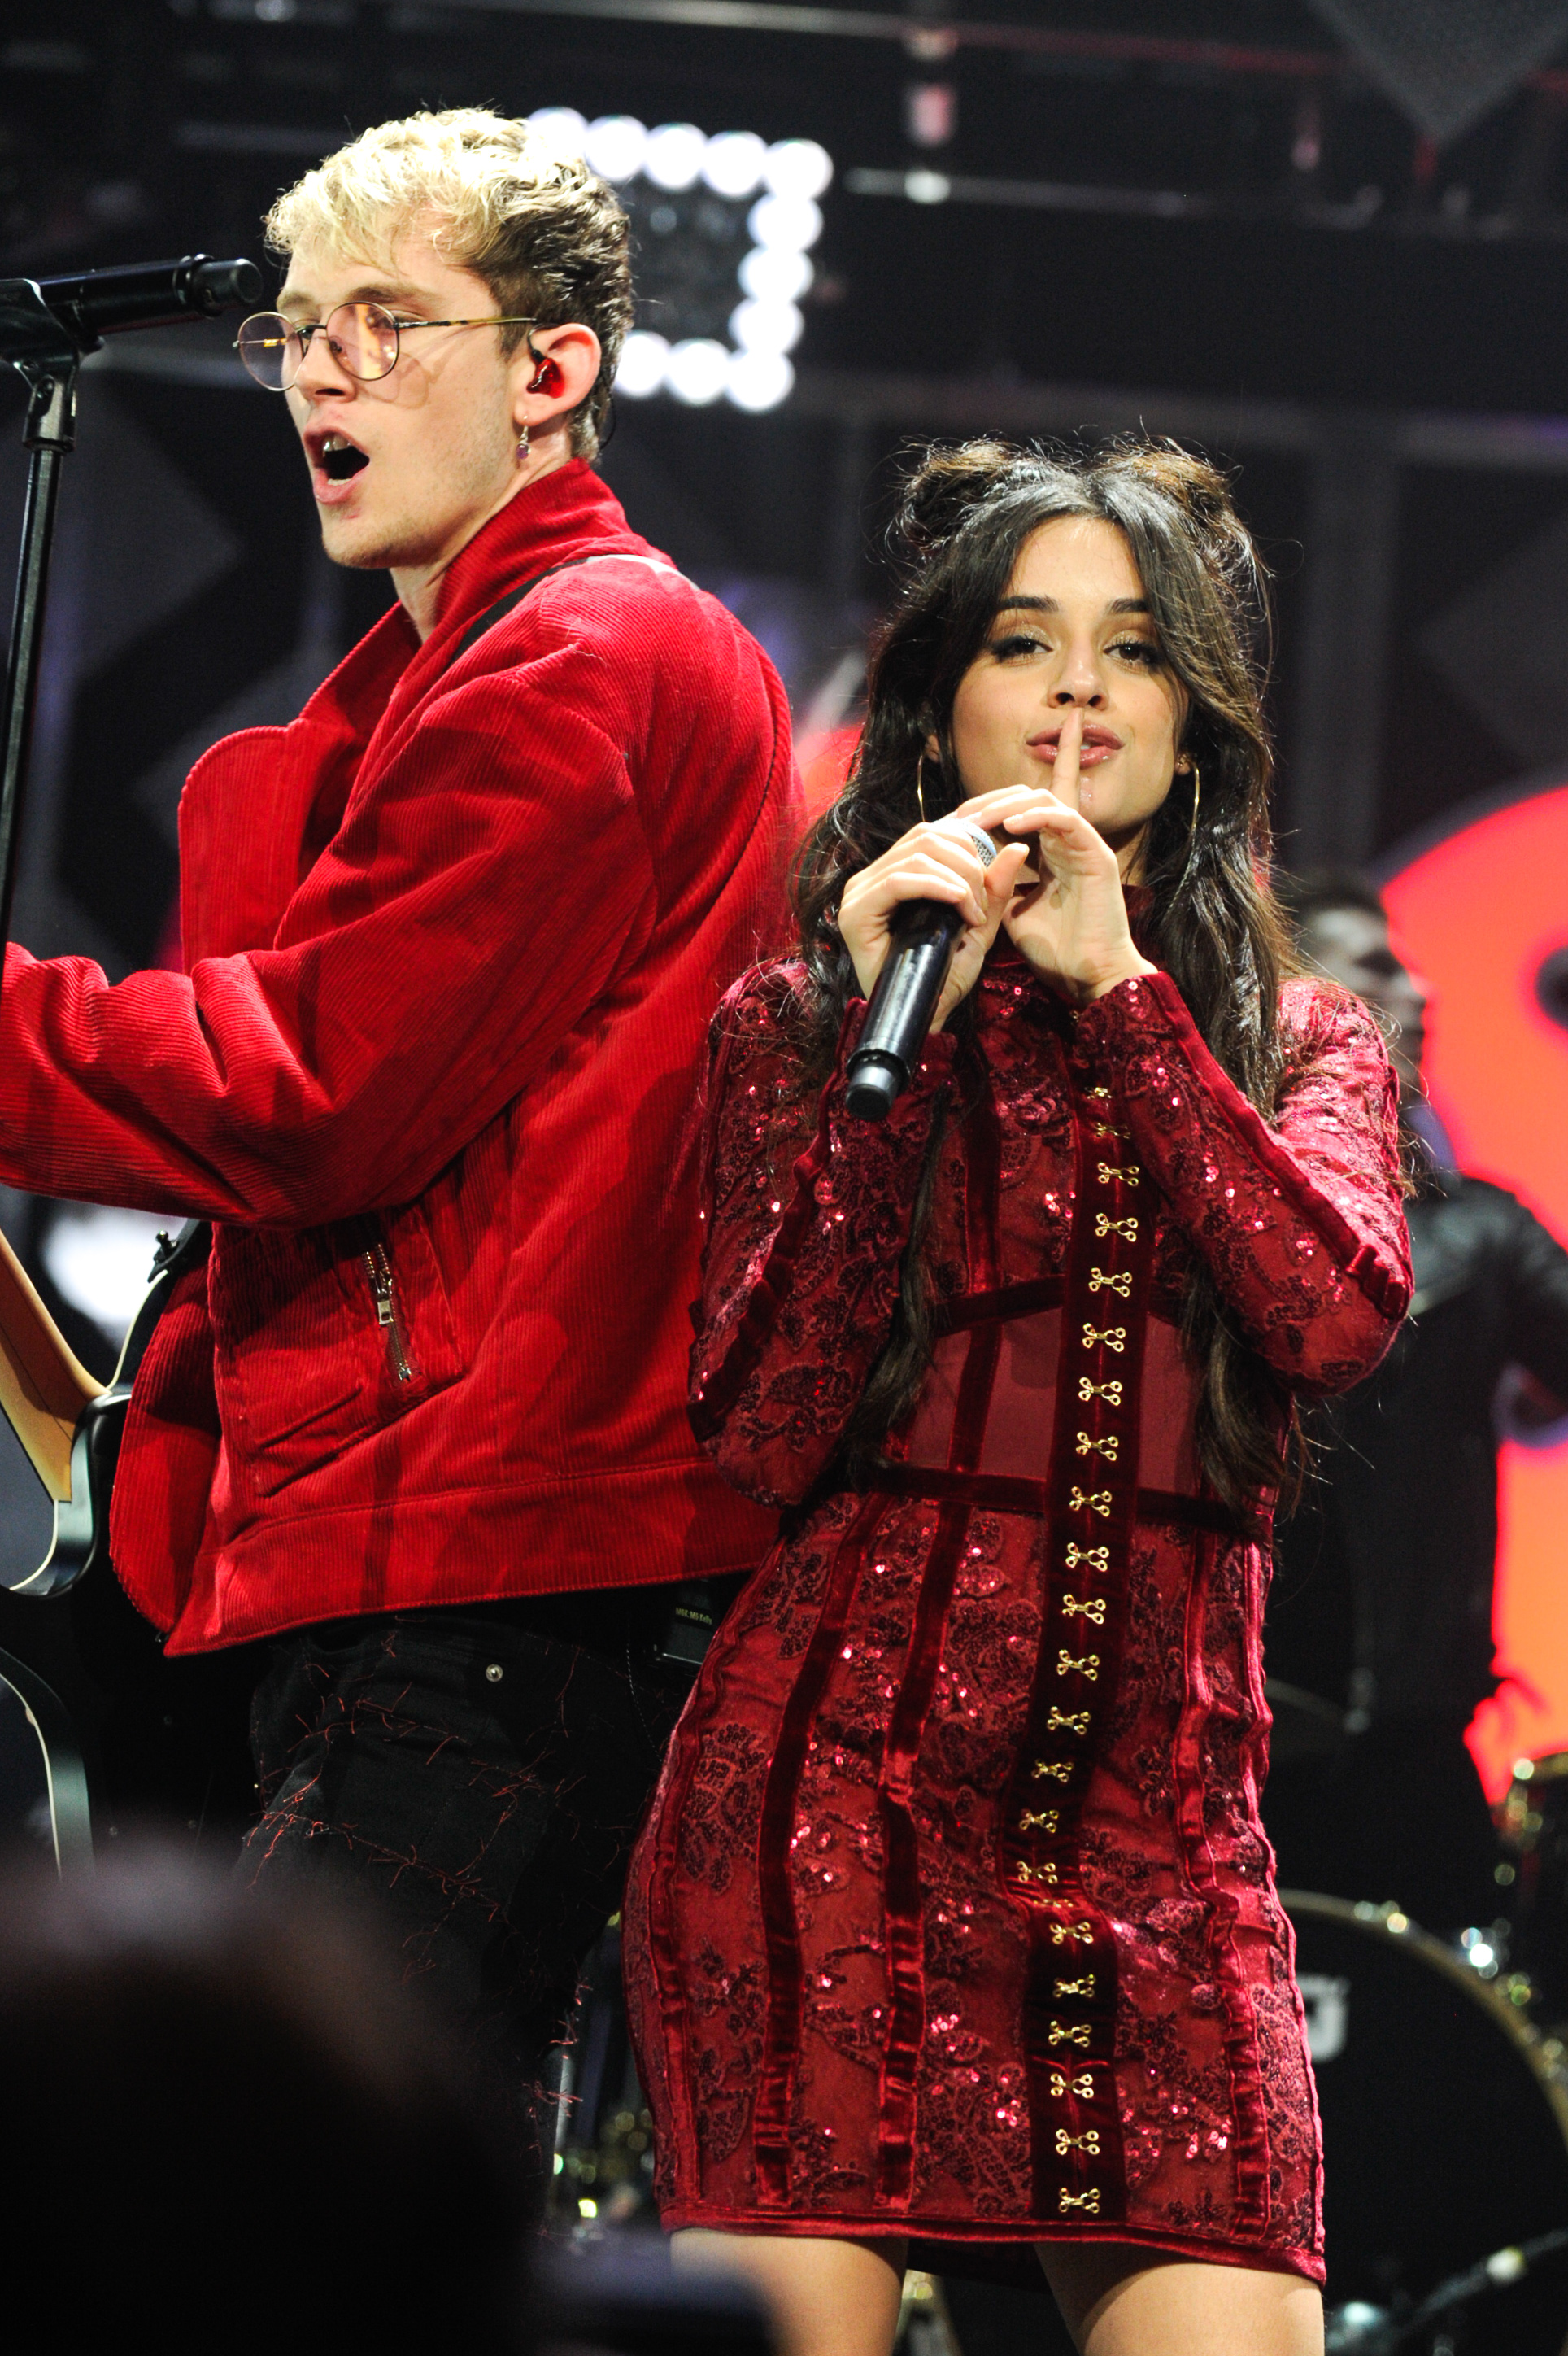 Machine Gun Kelly and Camila Cabello of Fifth Harmony perform on stage during the Y100's iHeartRadio Jingle Ball 2016 at BB&amp;T Center on December 18, 2016 in Sunrise, Florida. Sergi Alexander&mdash;FilmMagic (Sergi Alexander&mdash;FilmMagic)